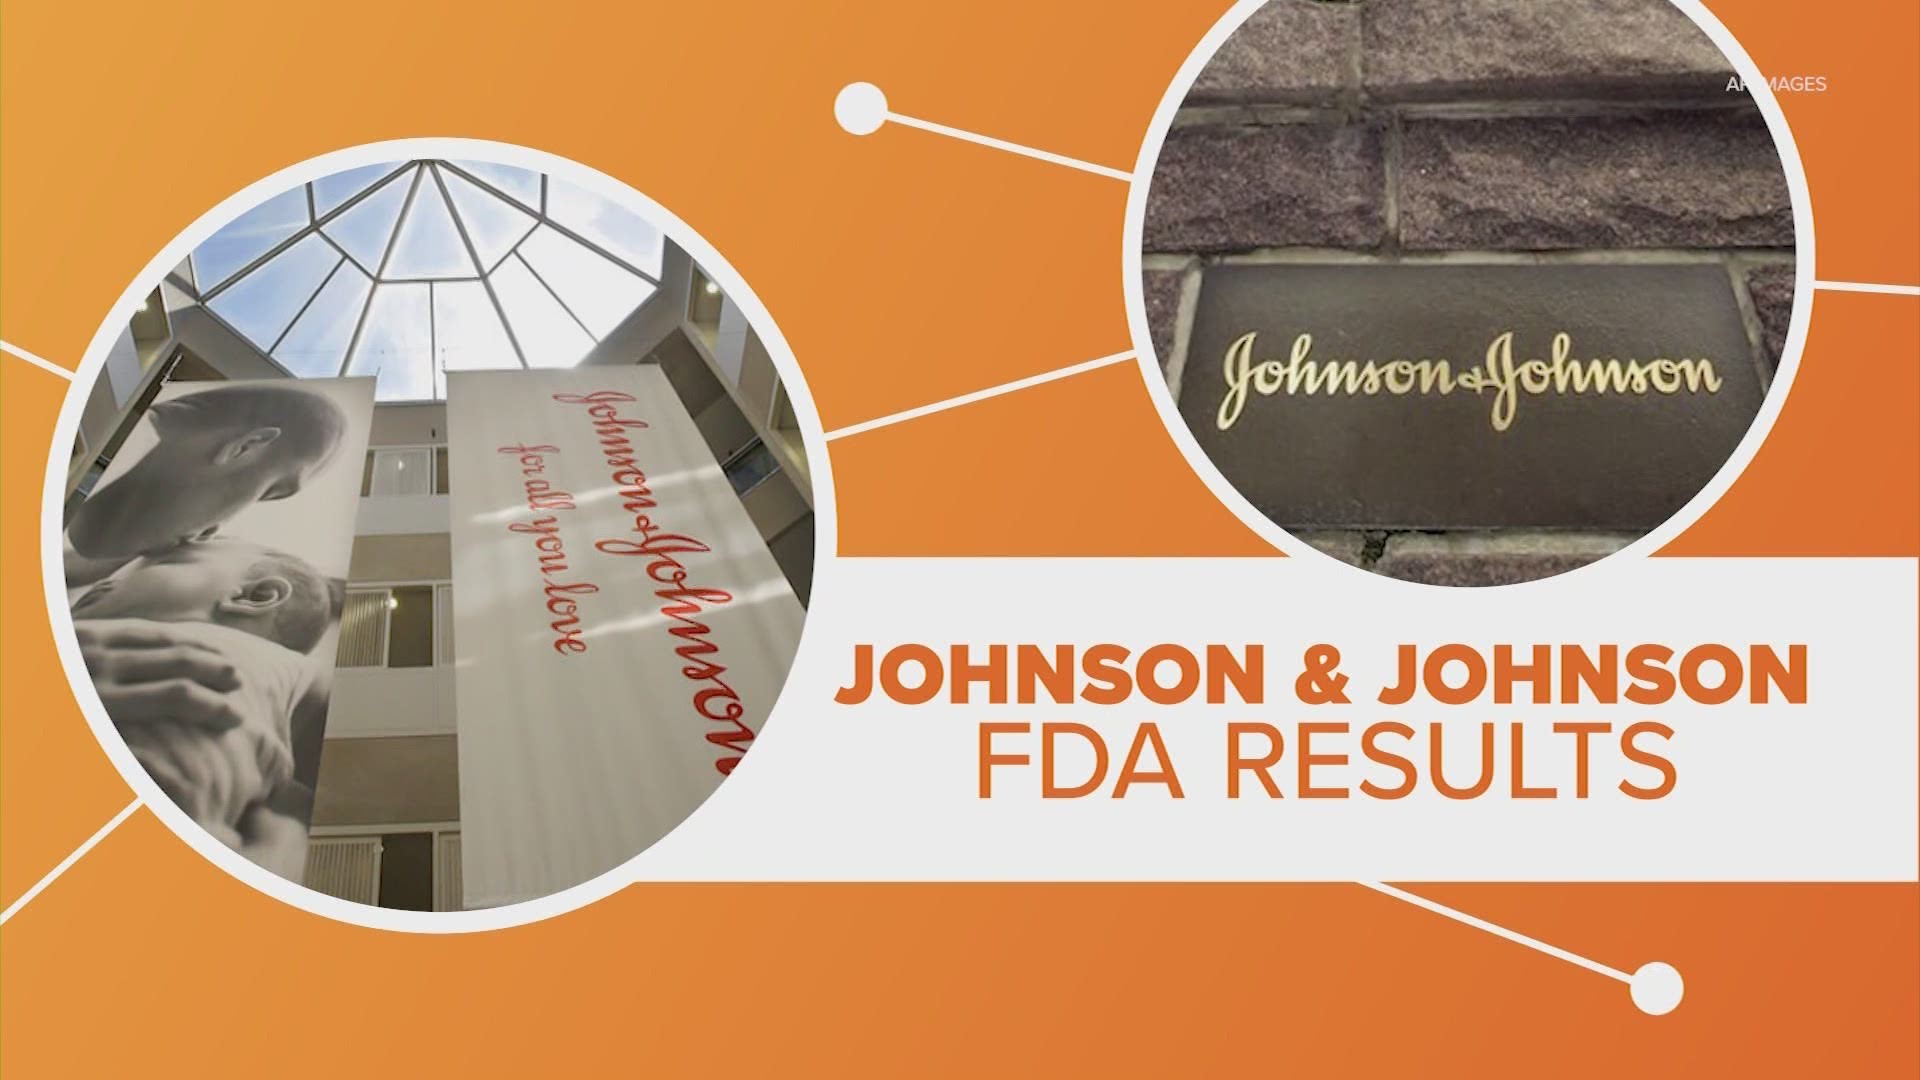 There are a lot of numbers thrown around when it comes to Johnson and Johnson’s coronavirus vaccine. But what do they call mean? Let’s connect the dots.